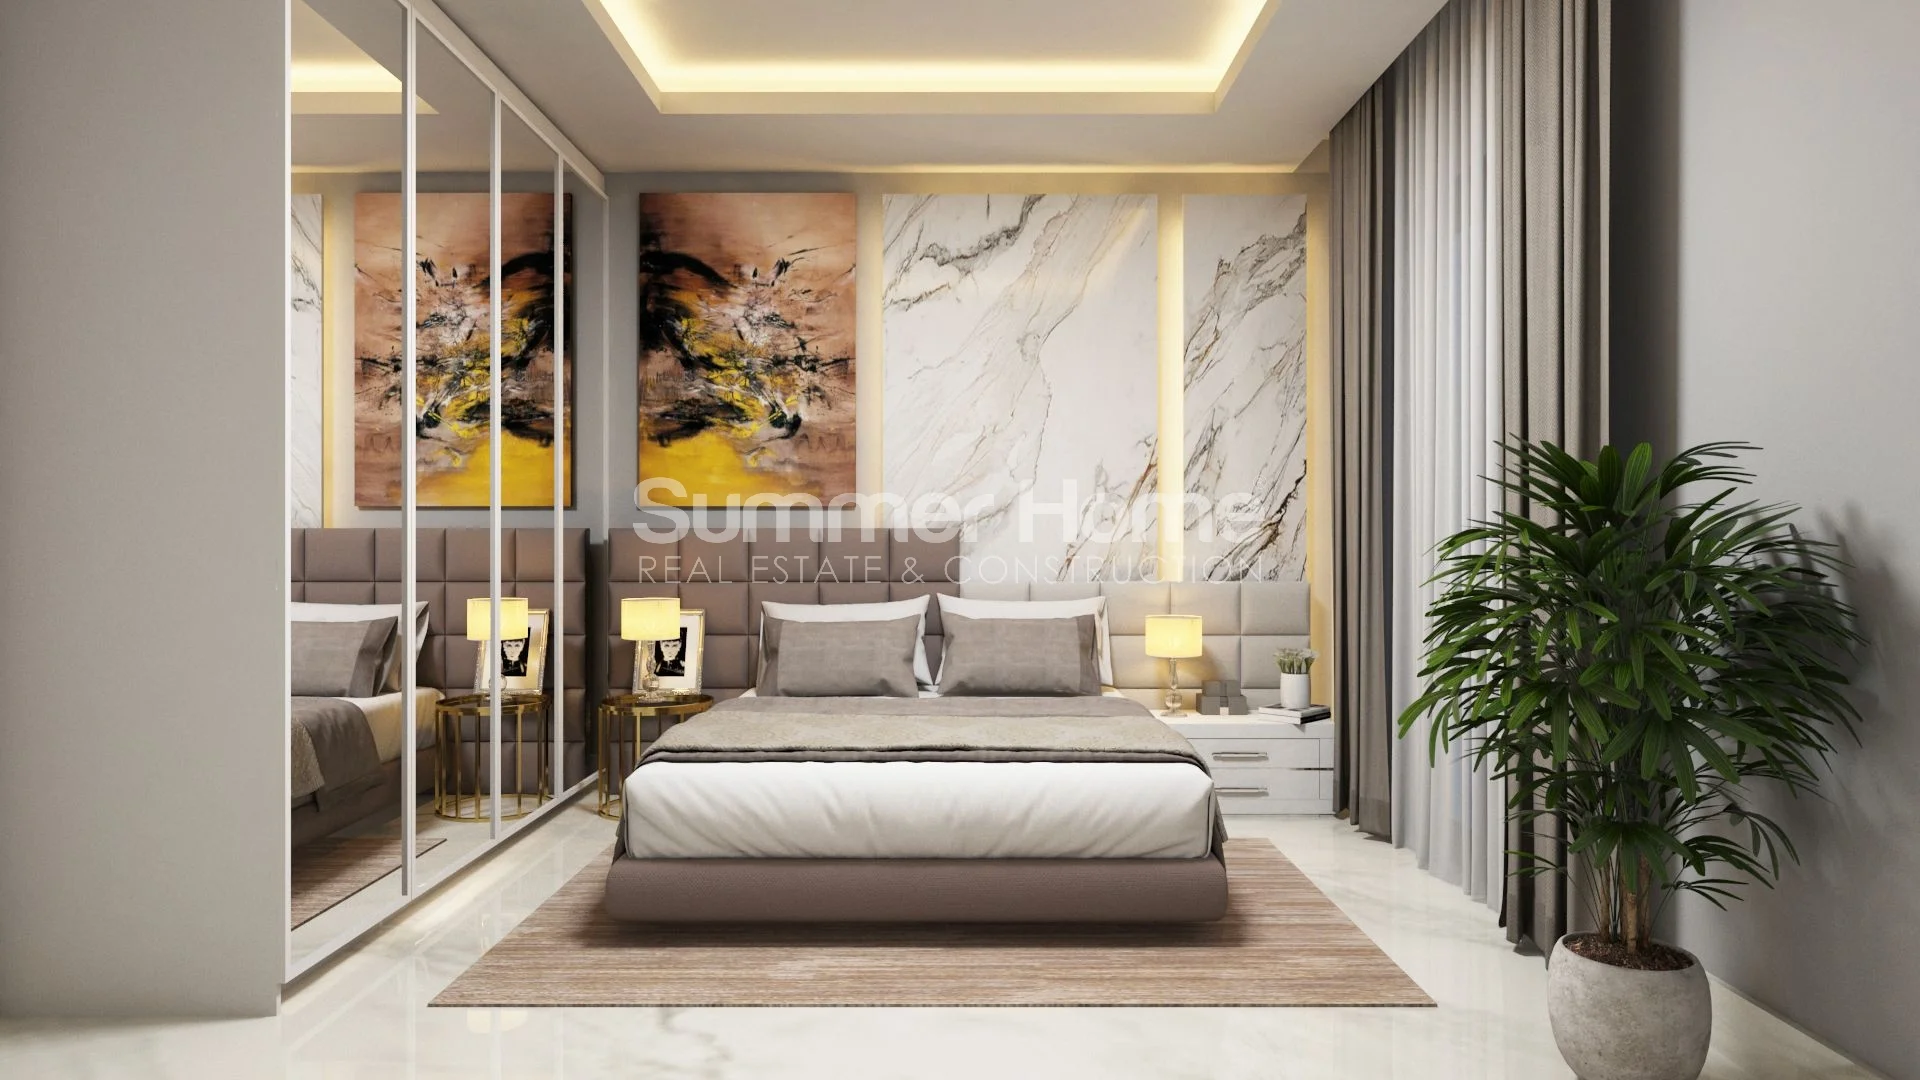 Chic and sleek apartments centrally located in Alanya Interior - 17